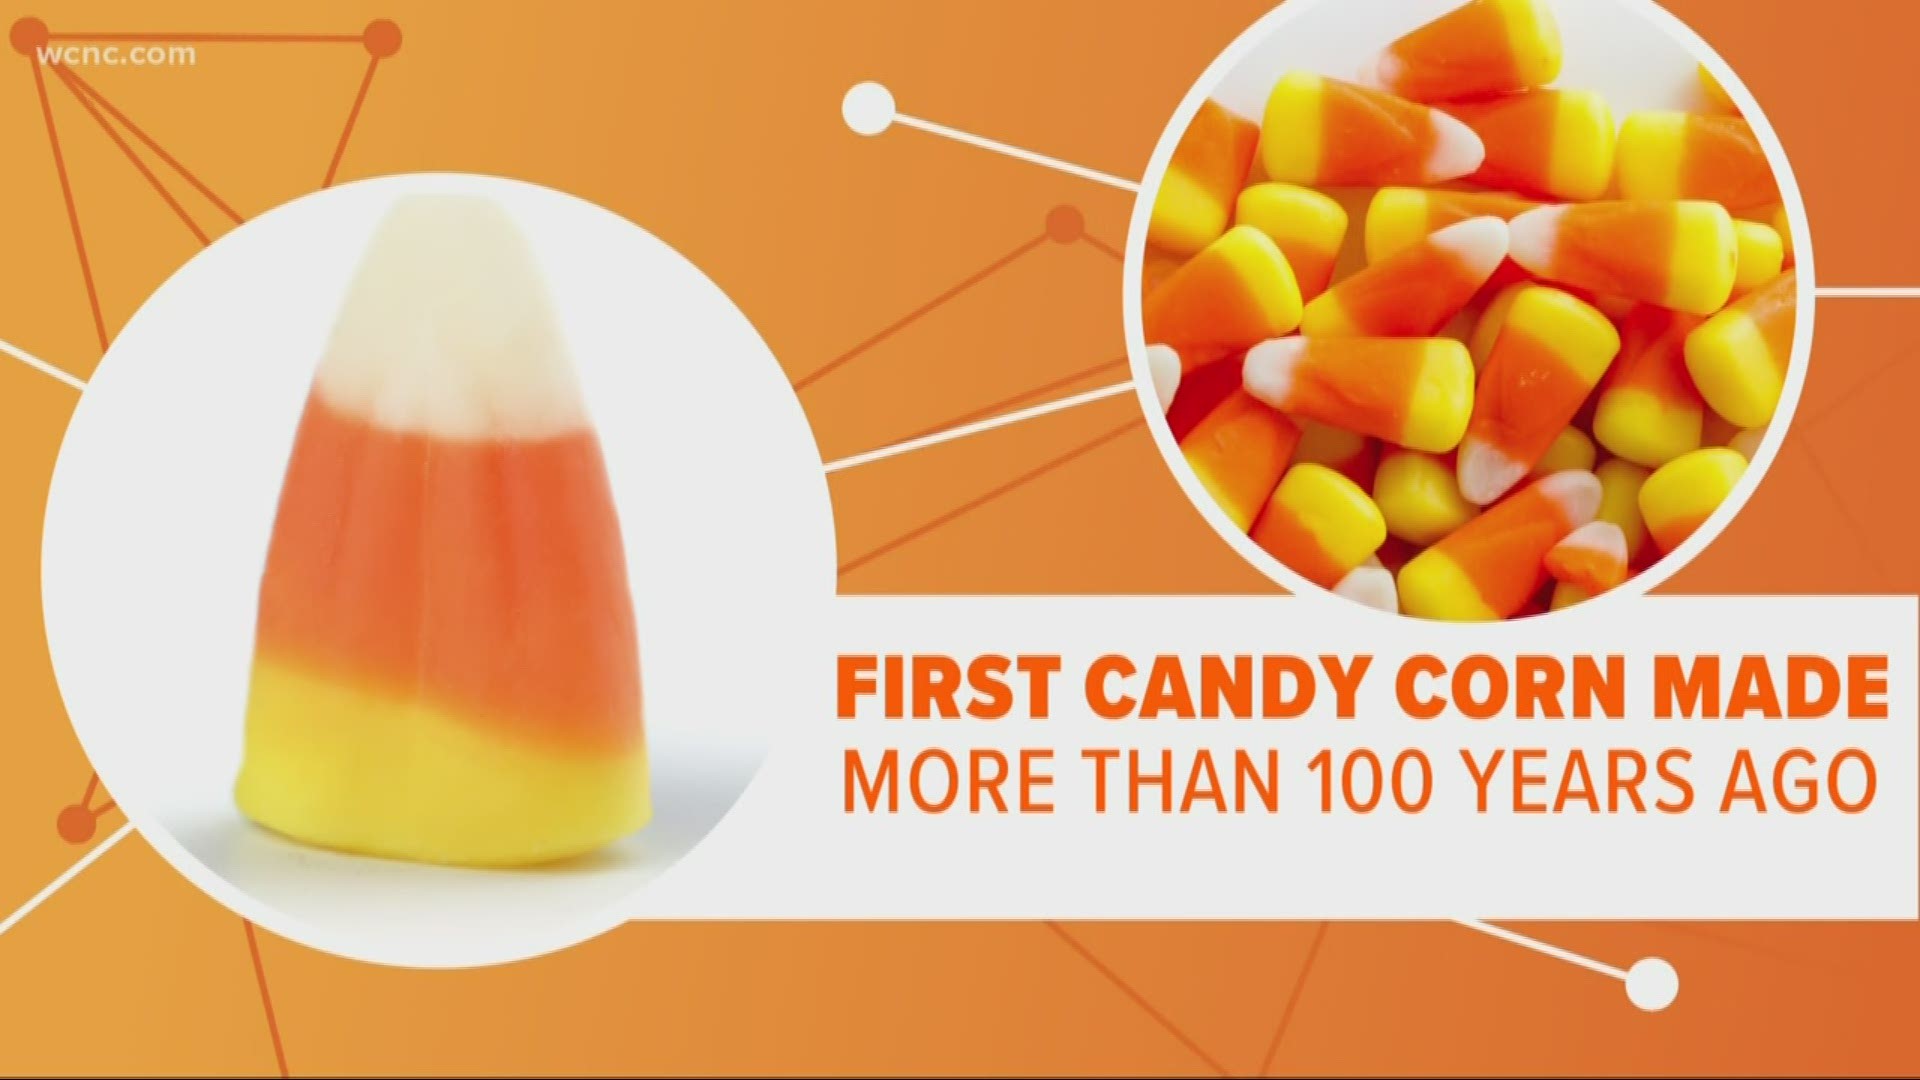 Whether you love or hate candy corn, just don't underestimate it, because it's been around longer than any of us.